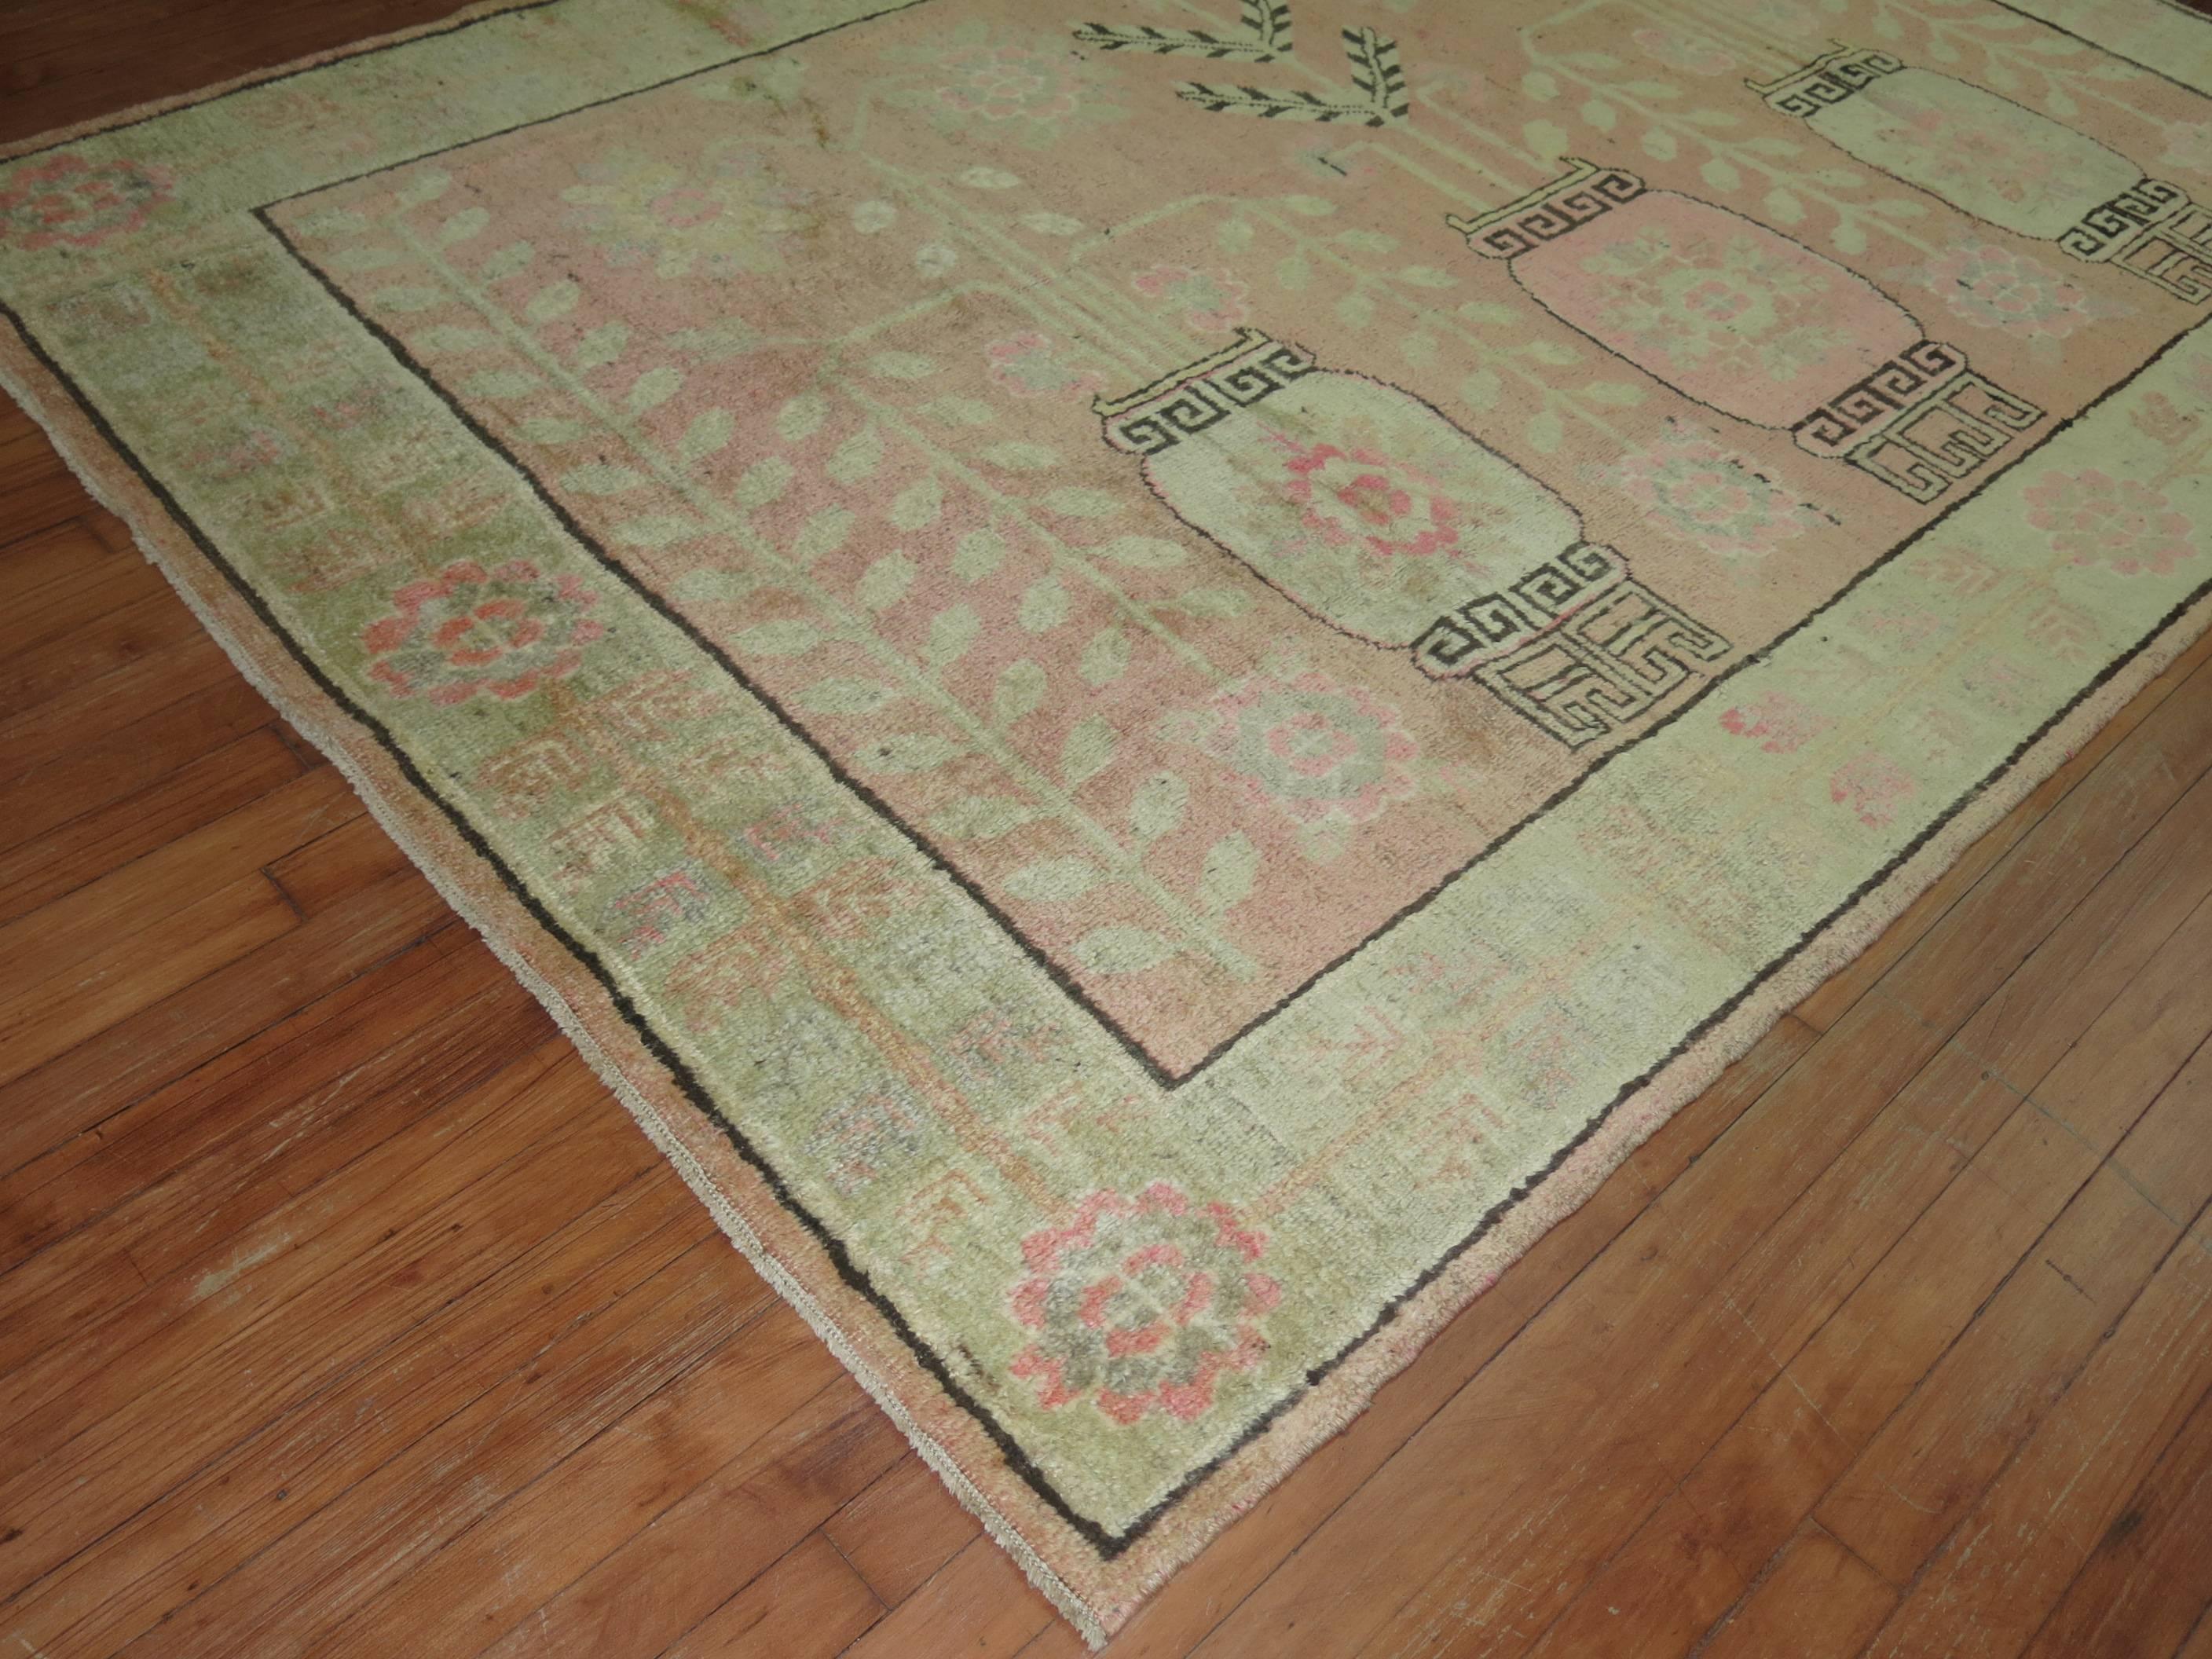 One of a kind Khotan rug with a soft pink field consisting of a flower vase motif and a soft green border.